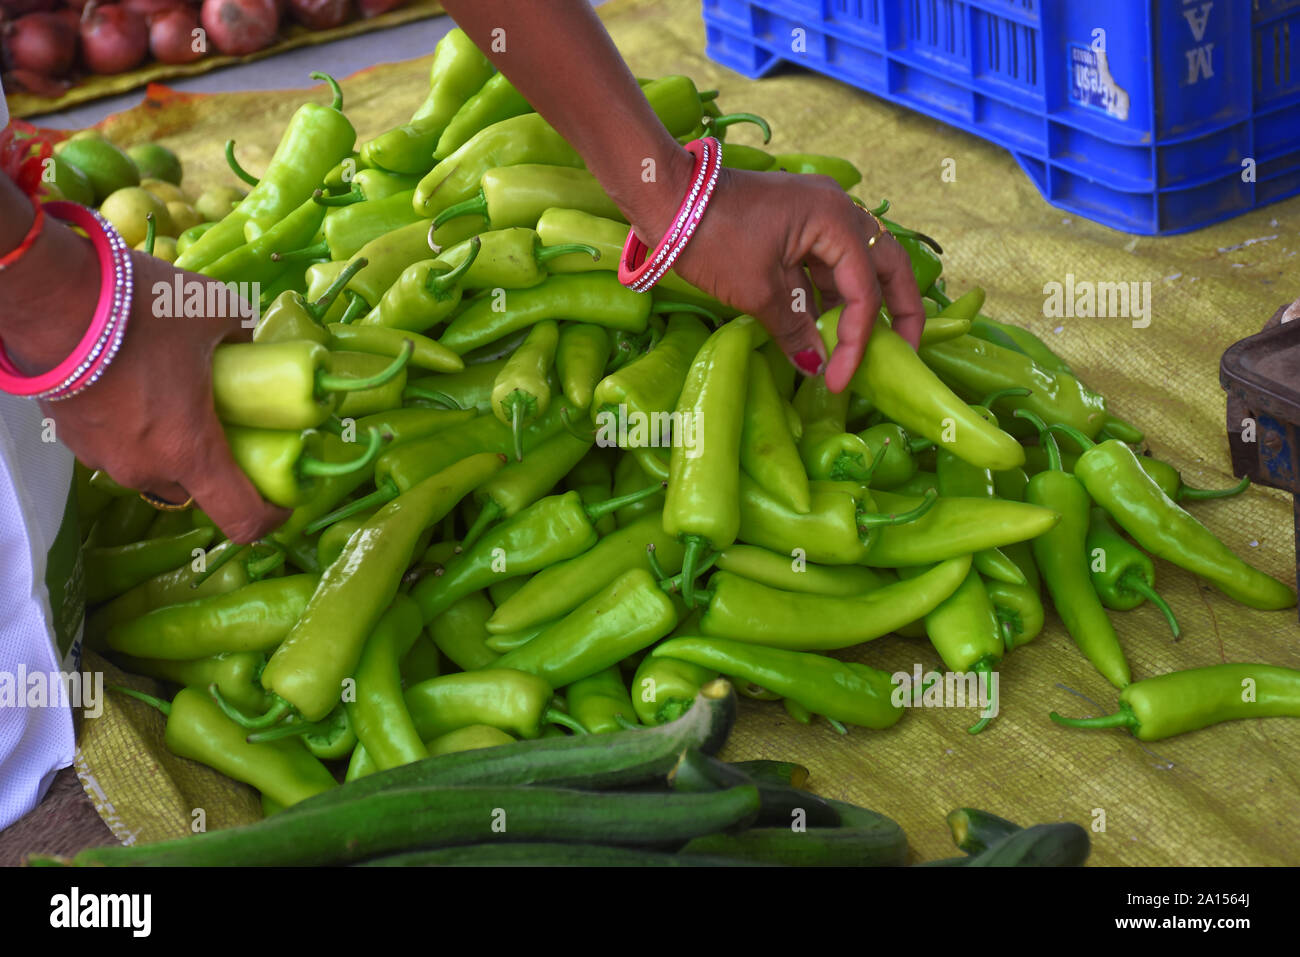 hands of lady buying green Bird's eye chili in indian market Stock Photo